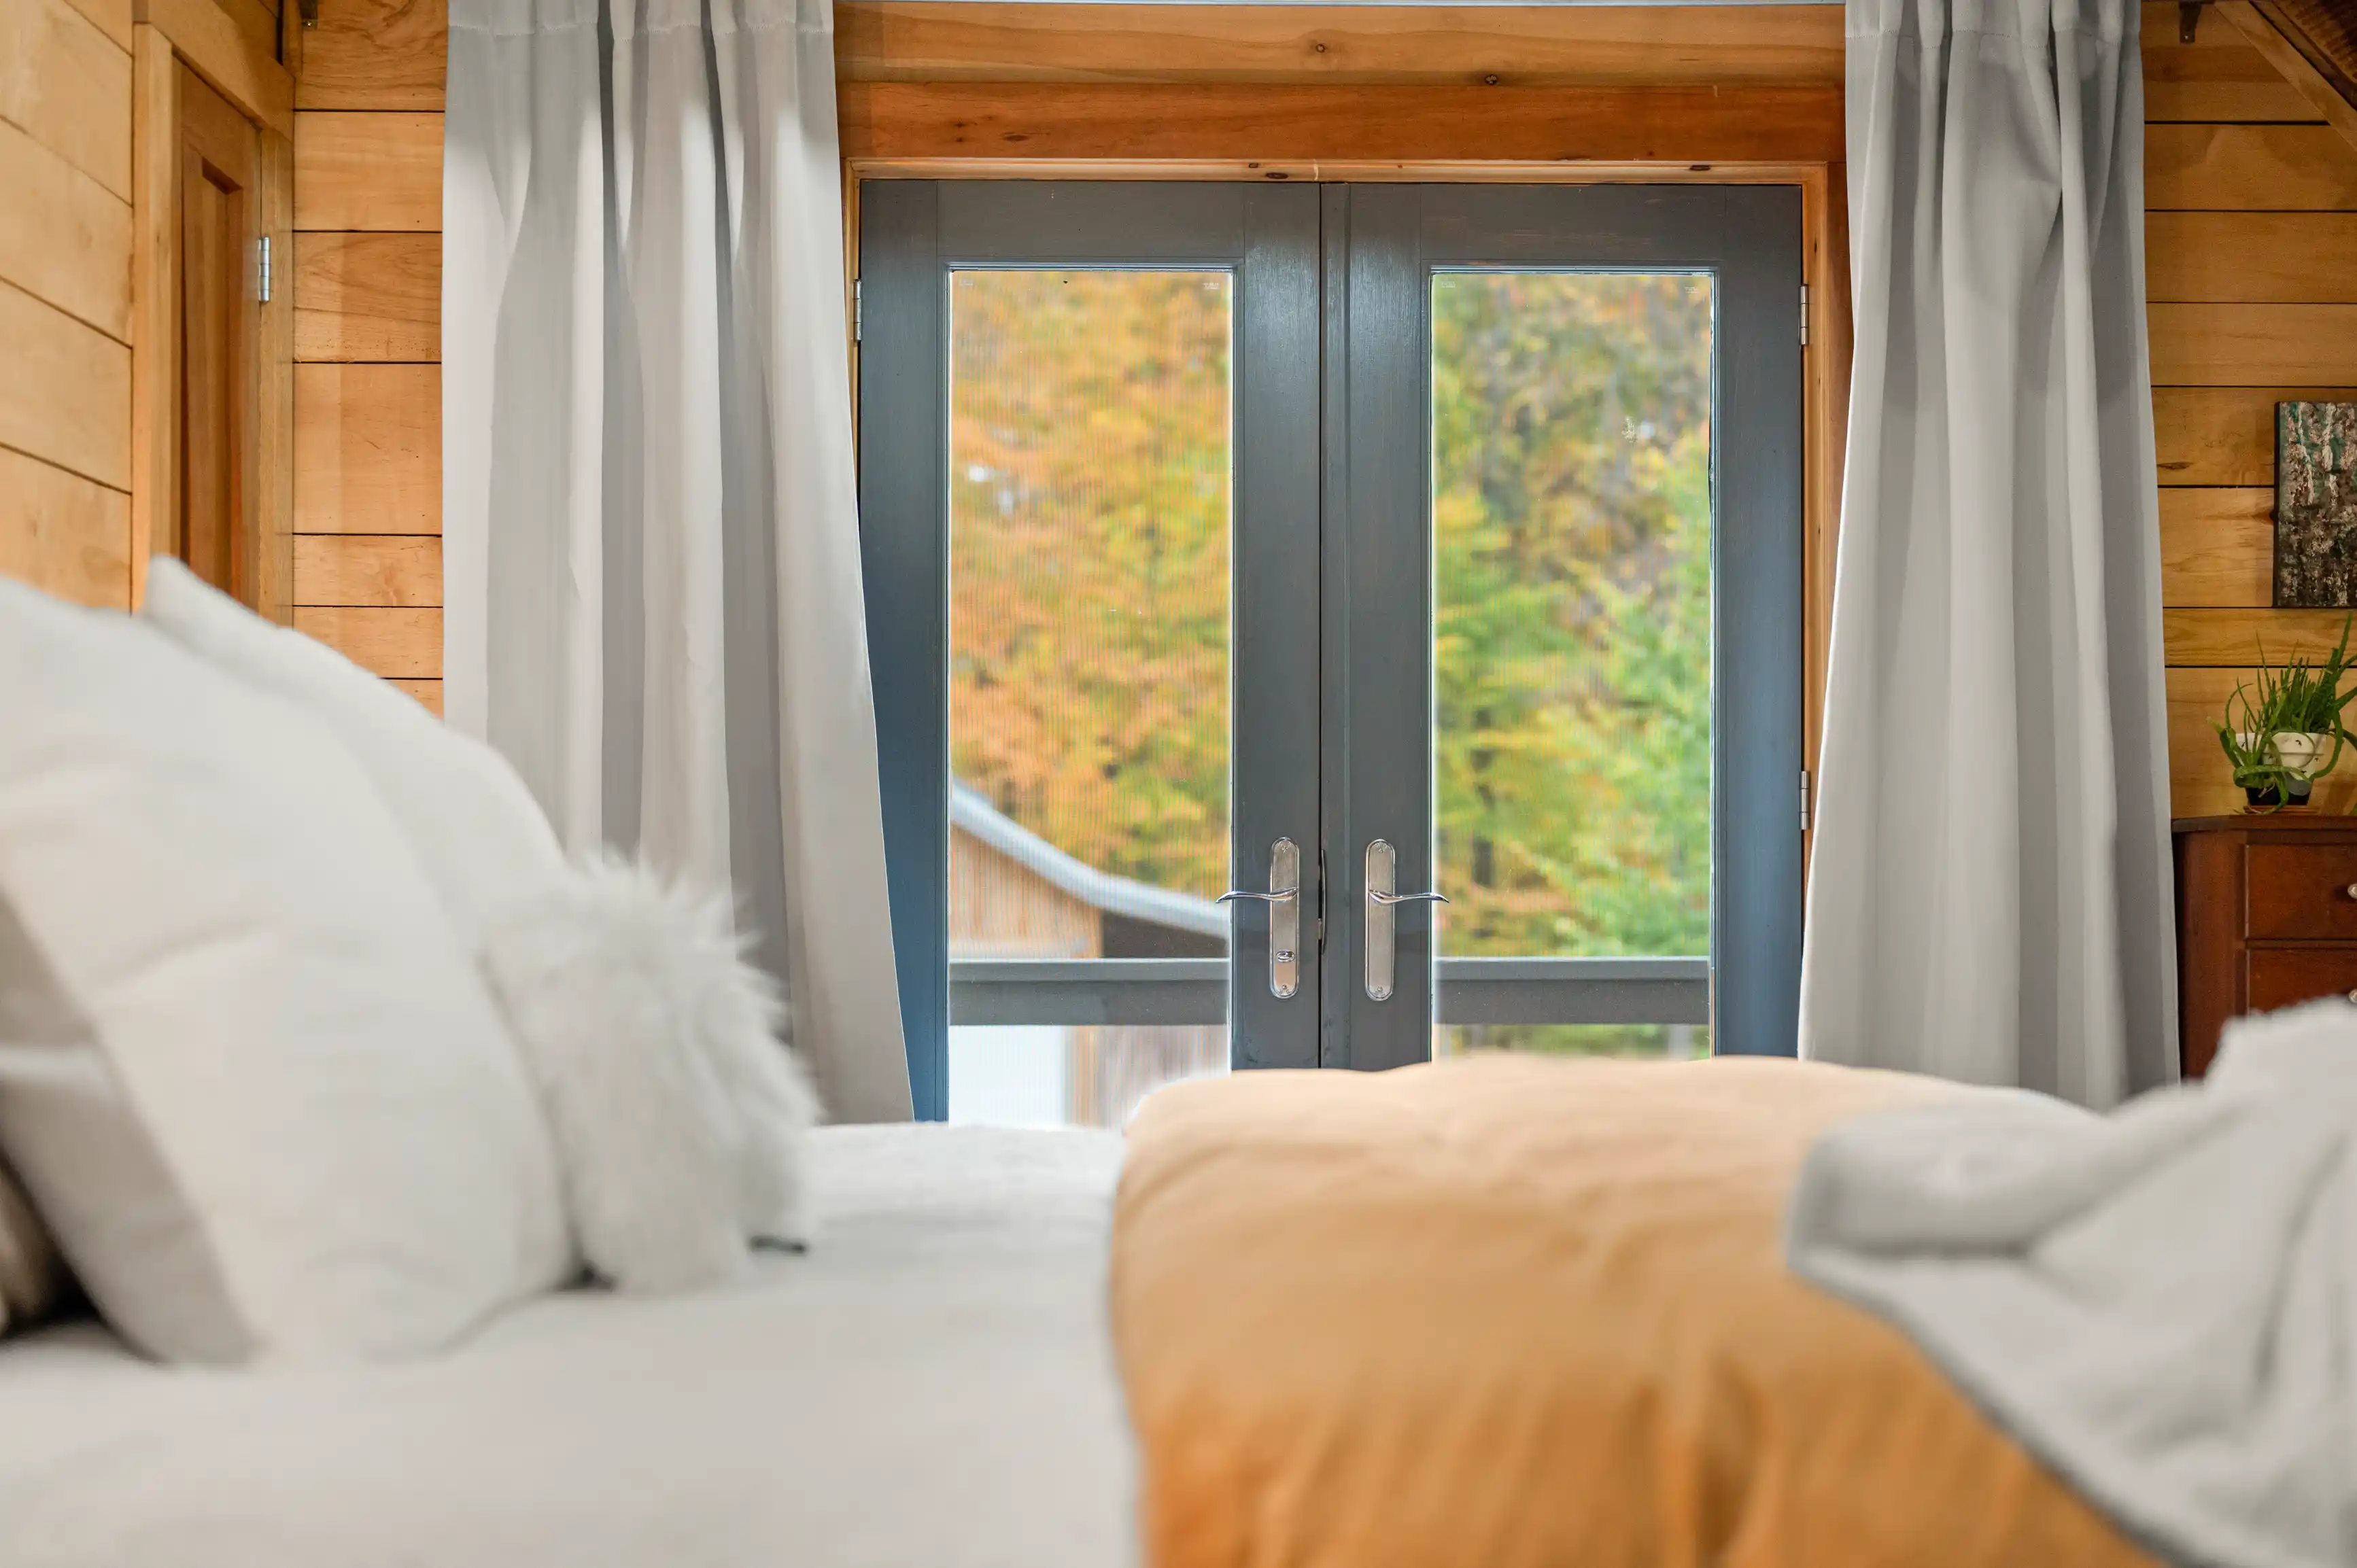 A cozy bedroom with a view of autumn foliage through a glass door, flanked by grey curtains.